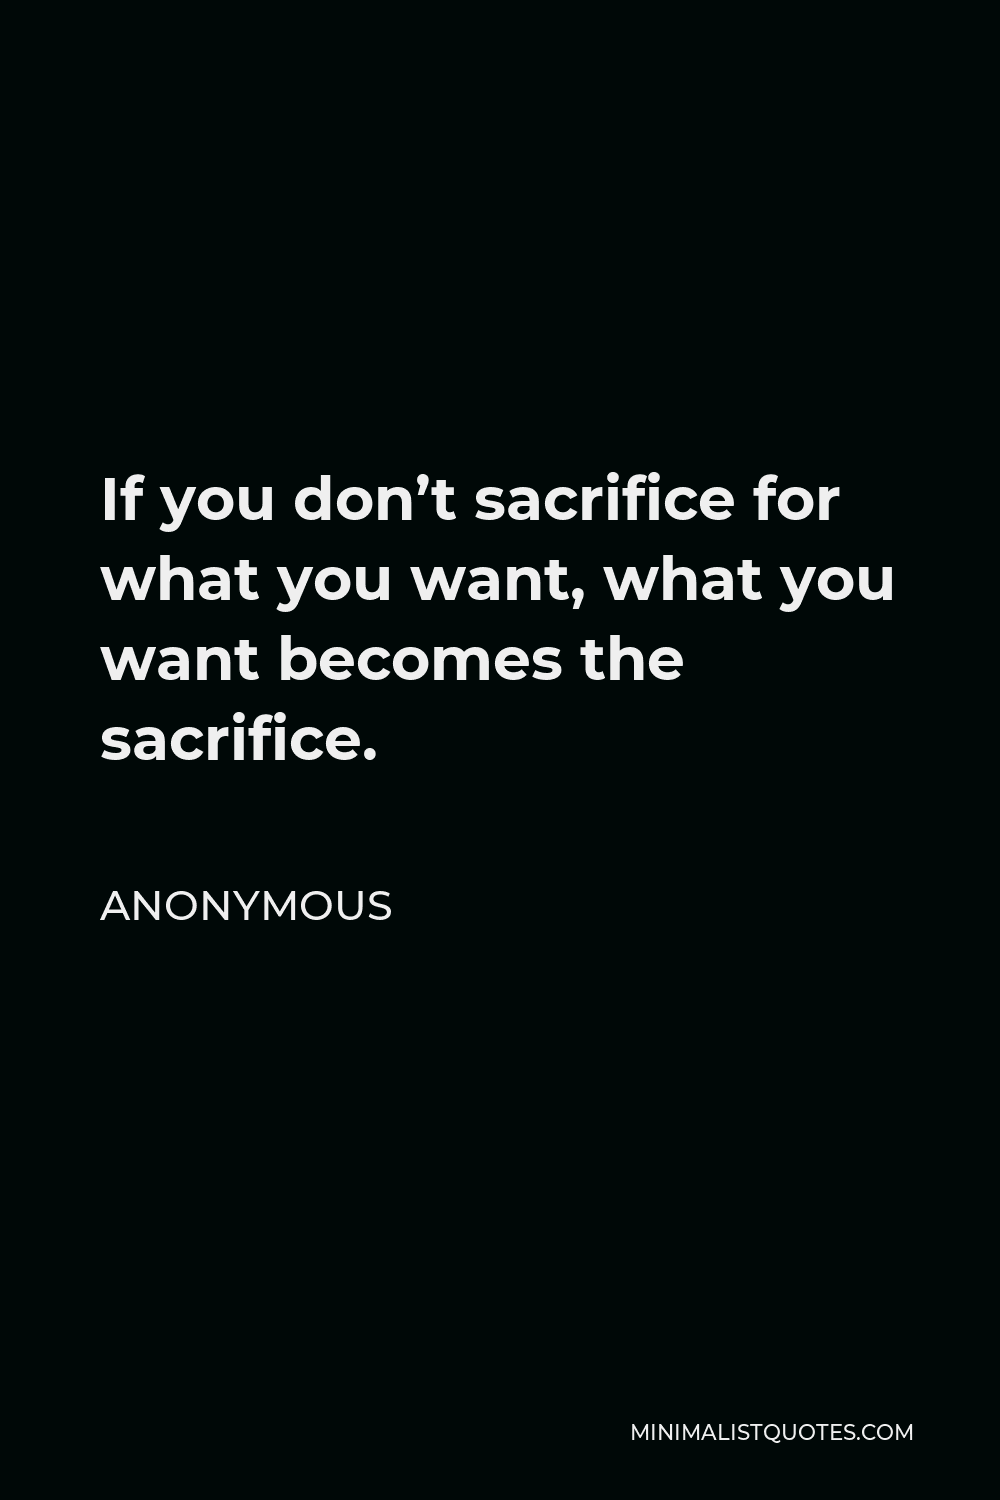 Anonymous Quote - If you don’t sacrifice for what you want, what you want becomes the sacrifice.